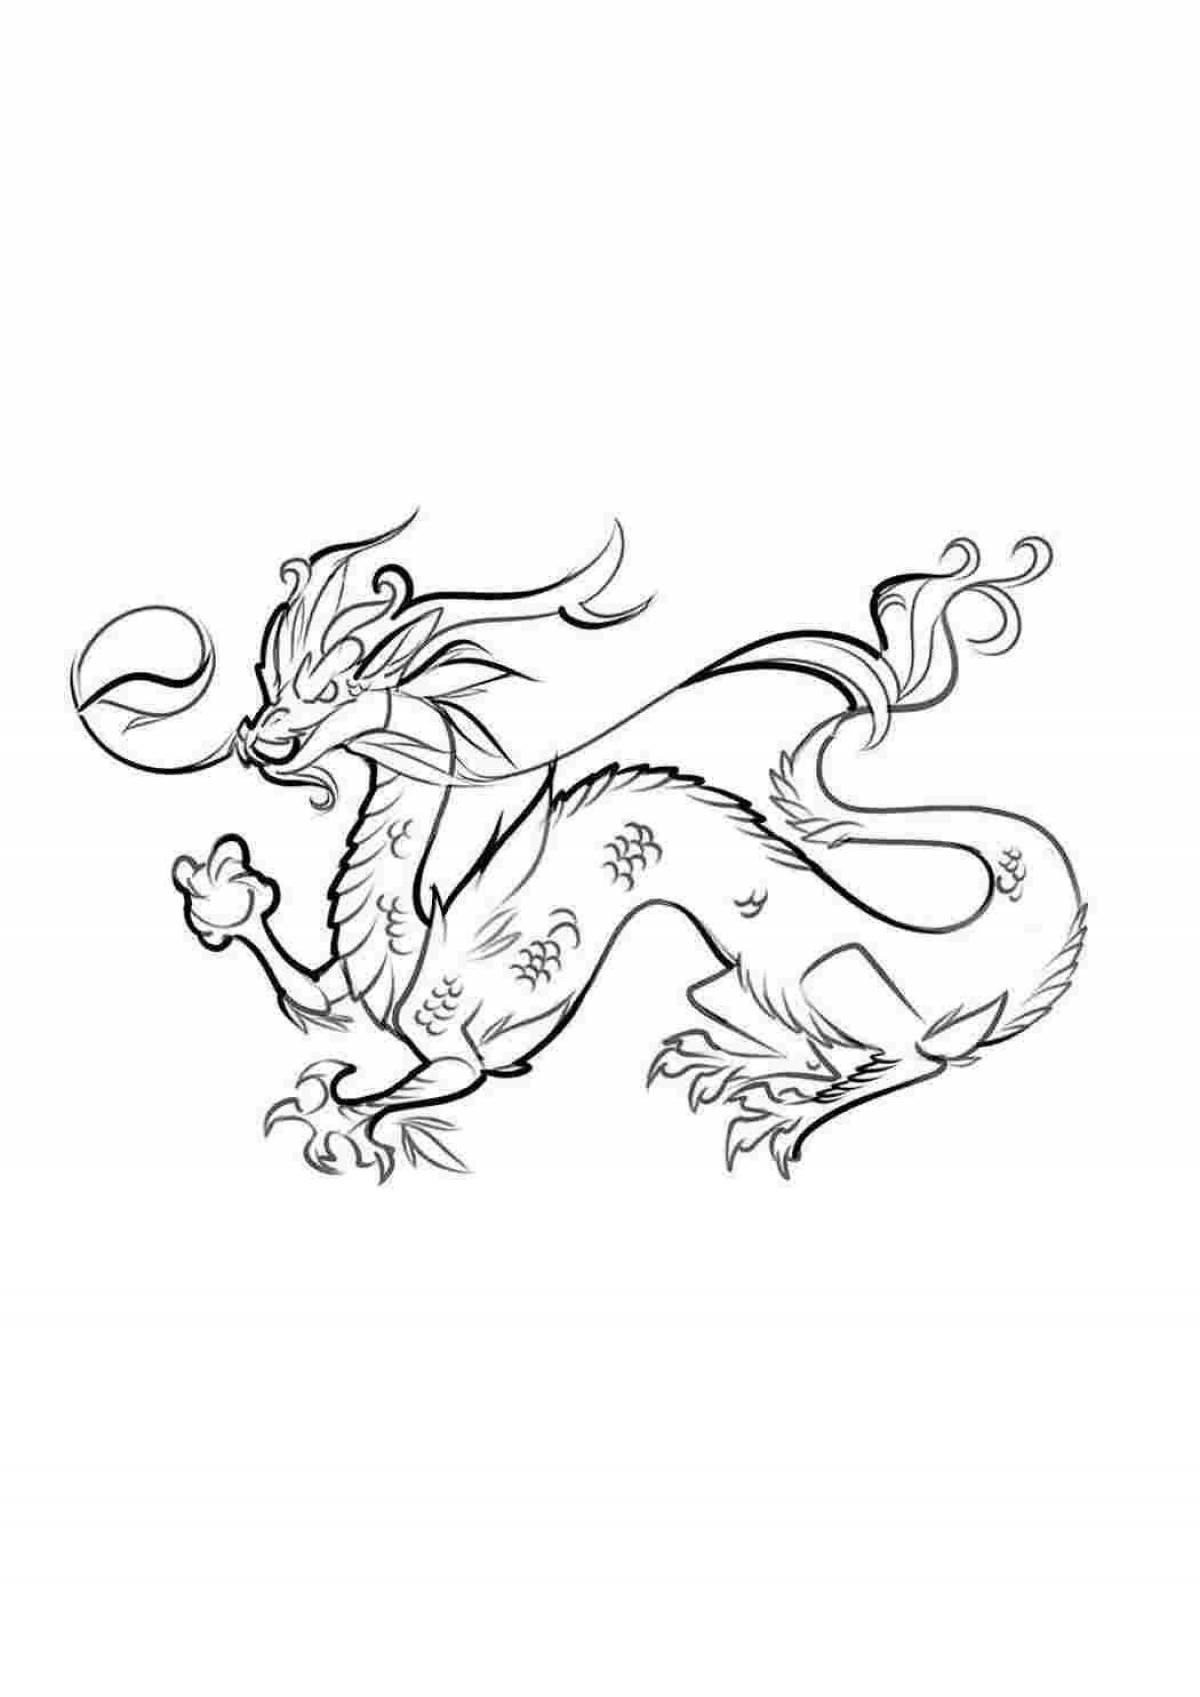 Fairy fairy dragon coloring page